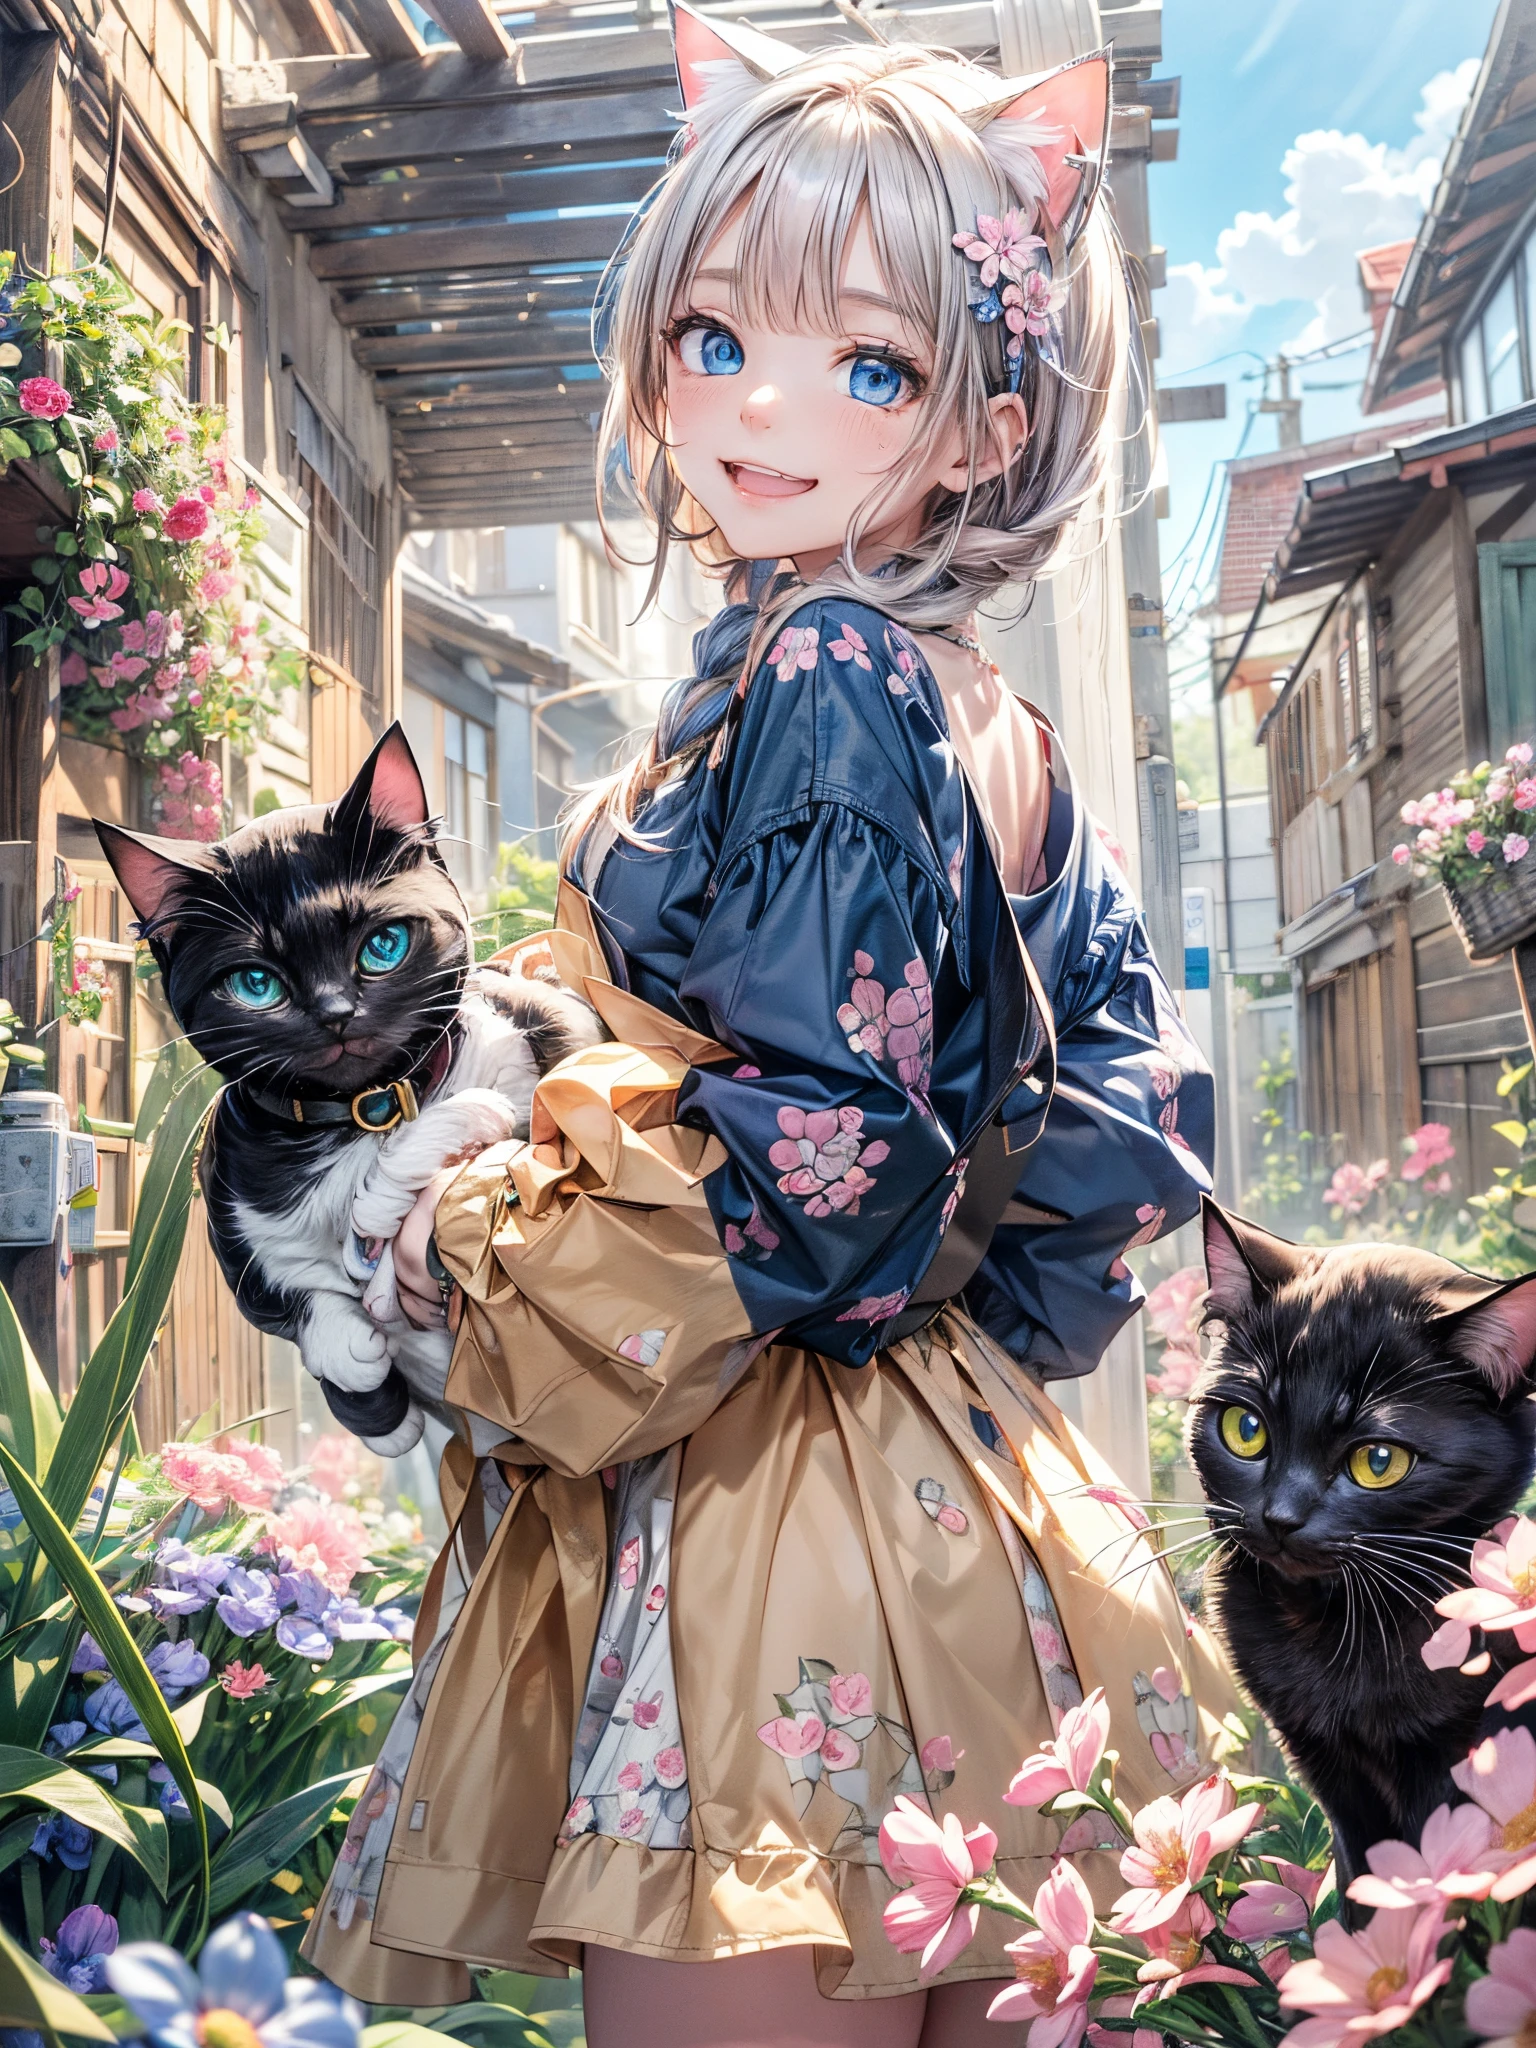 absurderes, ultra-detailliert,bright colour,(8K:1.5),masuter piece,Bright scenery、For that, blue open sky、extremely beautiful detailed face and eyes,(Cat personification:1.4)、(Deep Blue Eyes:1.4) Valley、Pink skin、Summer morning、A back alley with lots of flowers blooming、(Cat Pose),(Too cute smile:1.3)、double tooth,